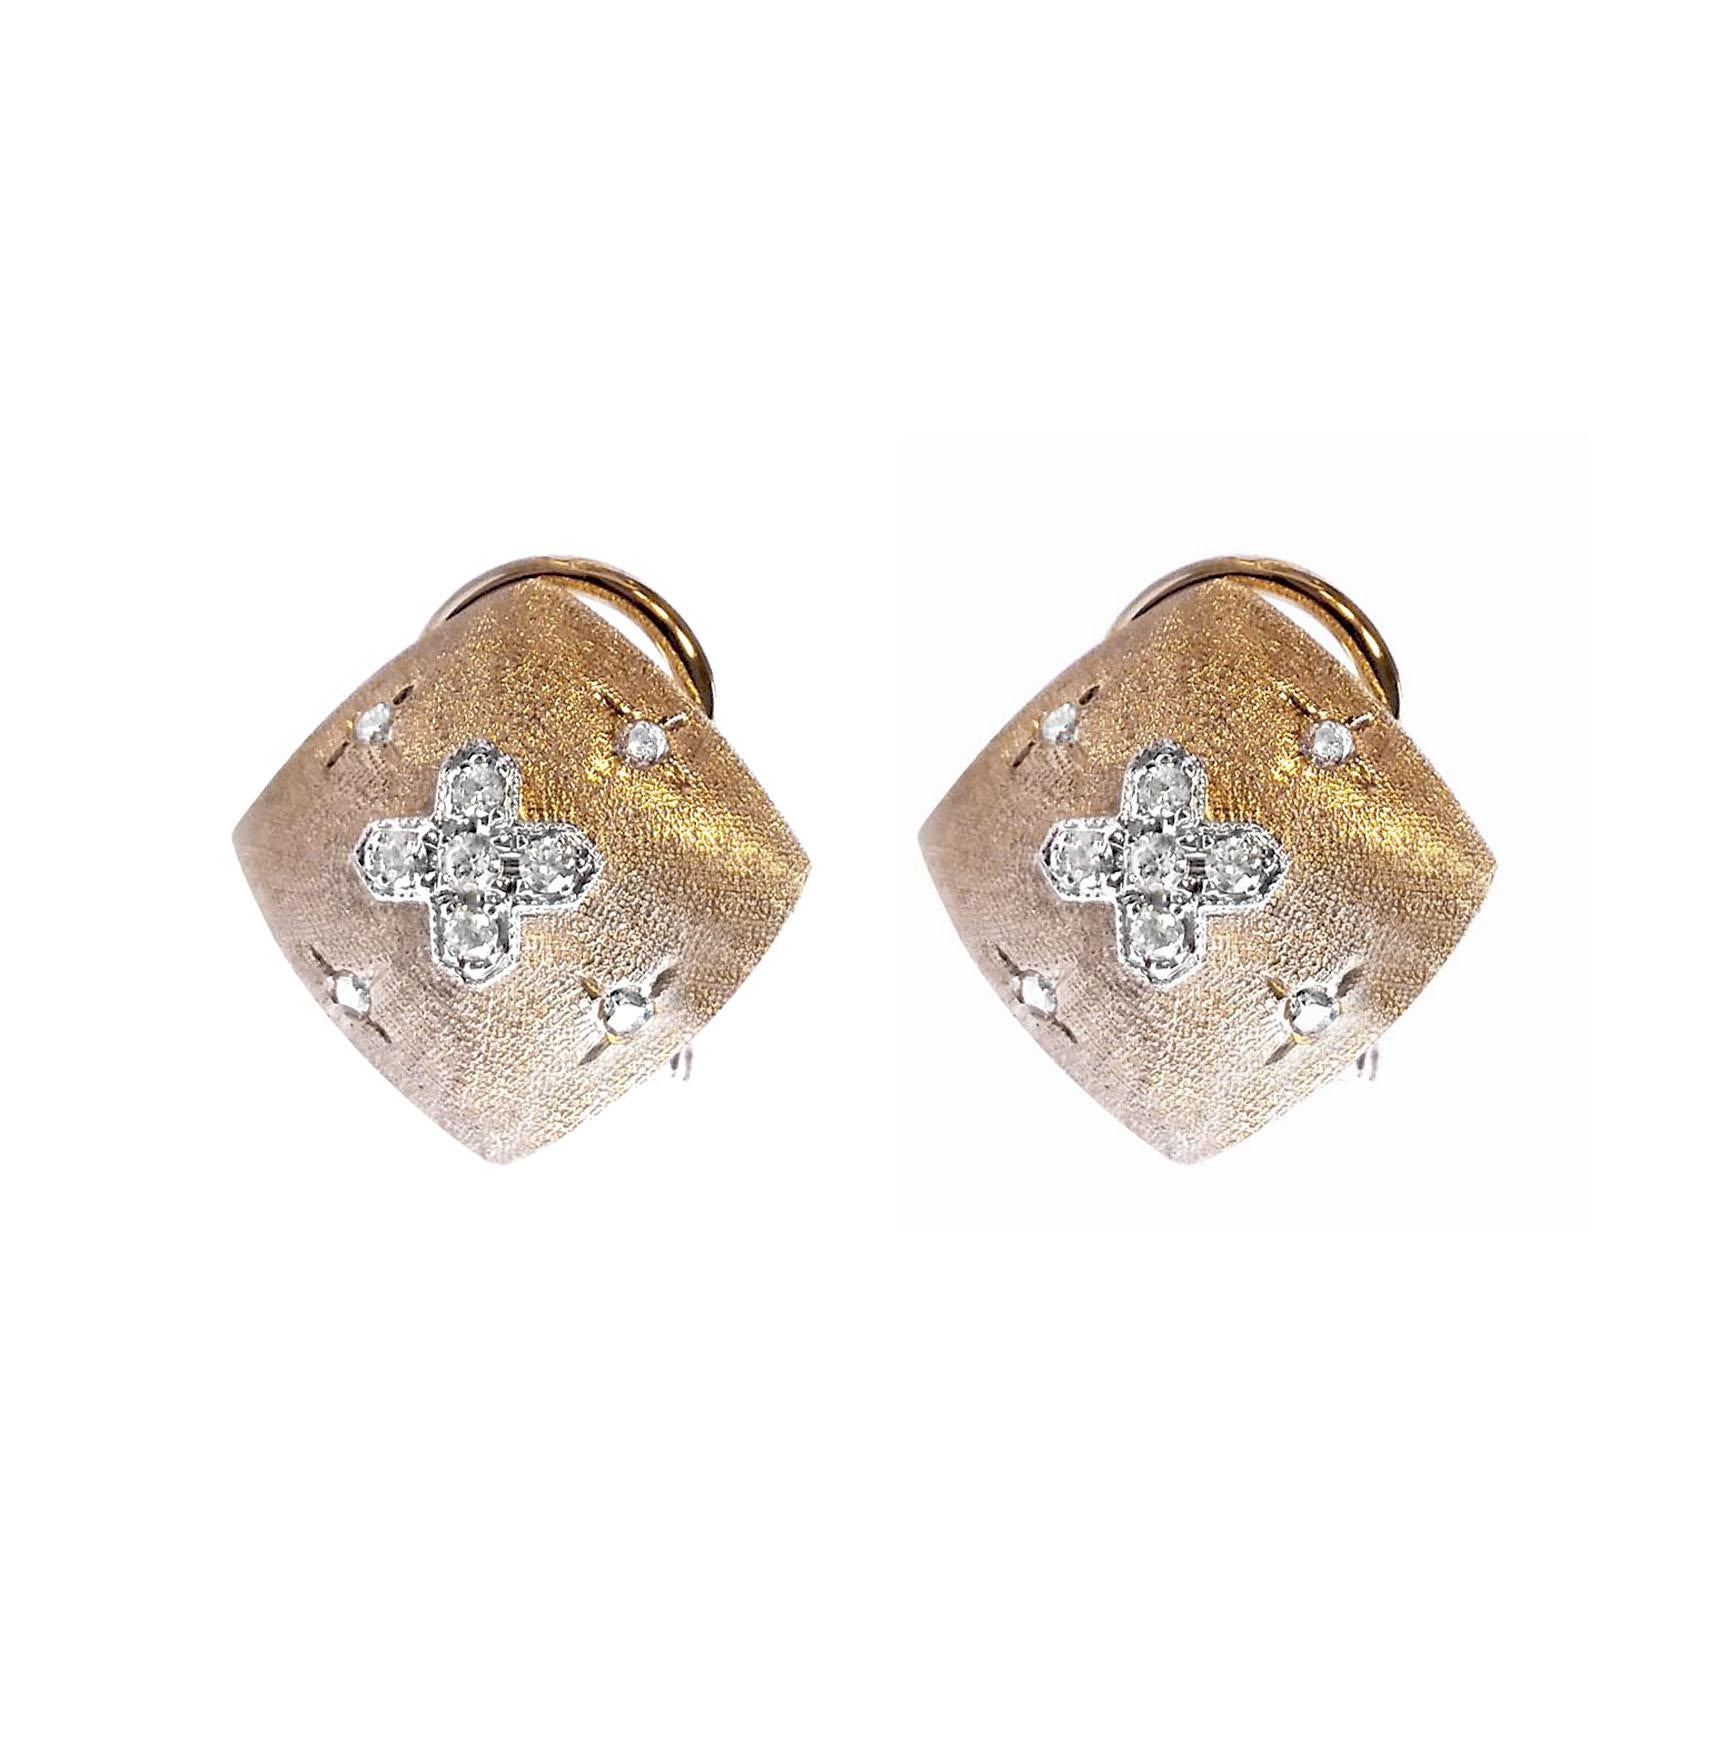 Vitolo 18 Karat Gold Florentine Finish Diamond Earrings In New Condition For Sale In Los Angeles, CA